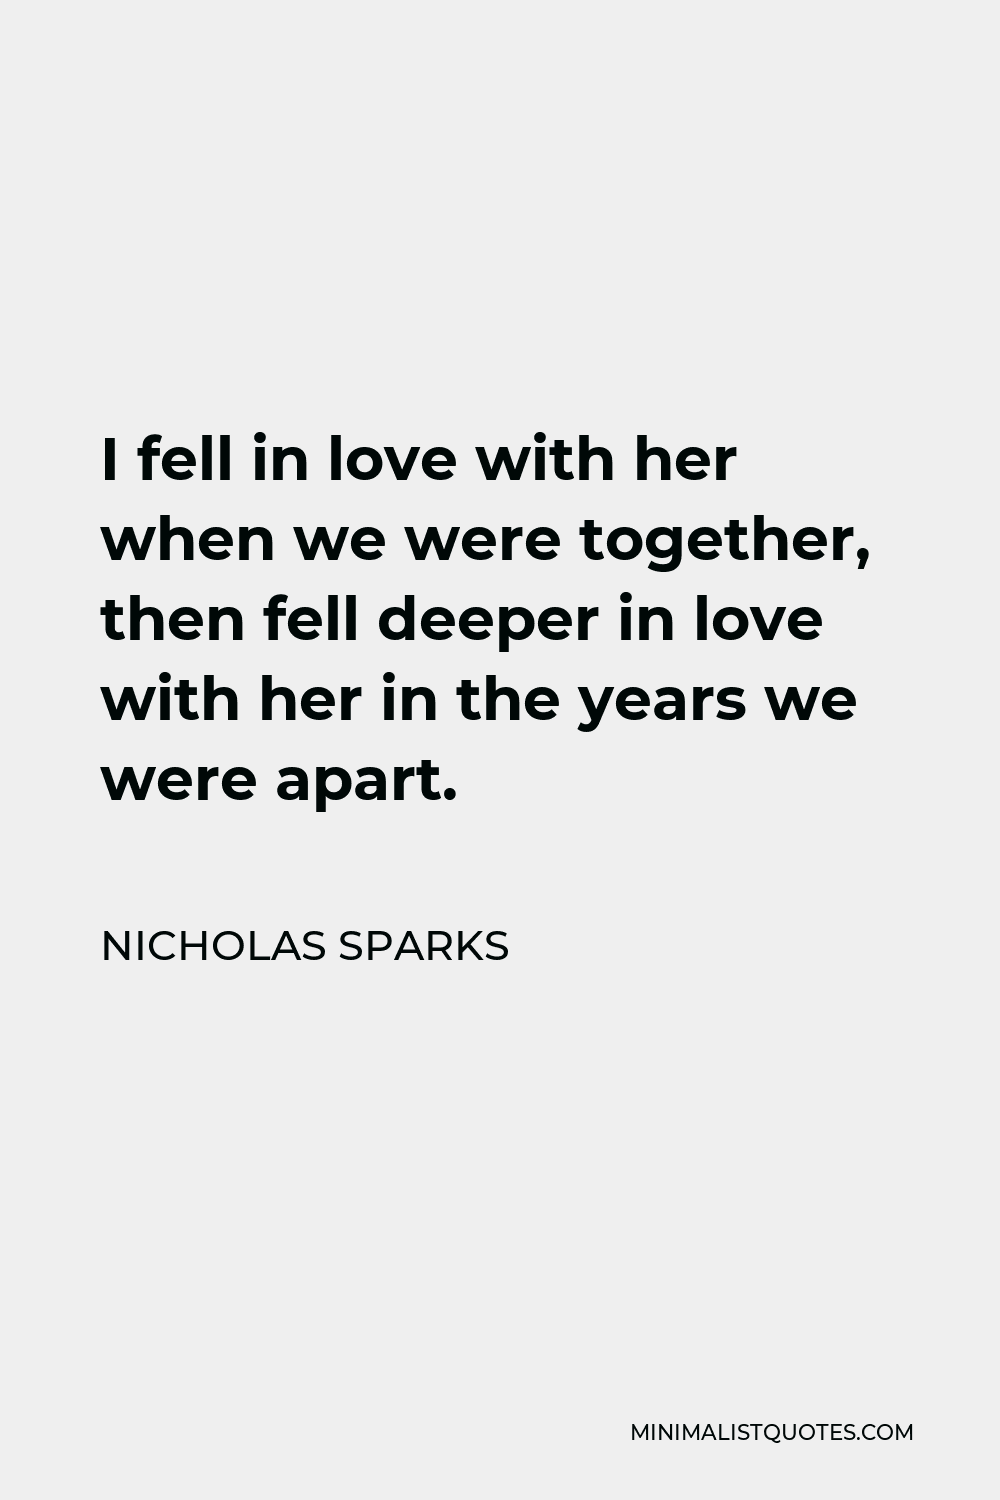 Nicholas Sparks Quote - I fell in love with her when we were together, then fell deeper in love with her in the years we were apart.